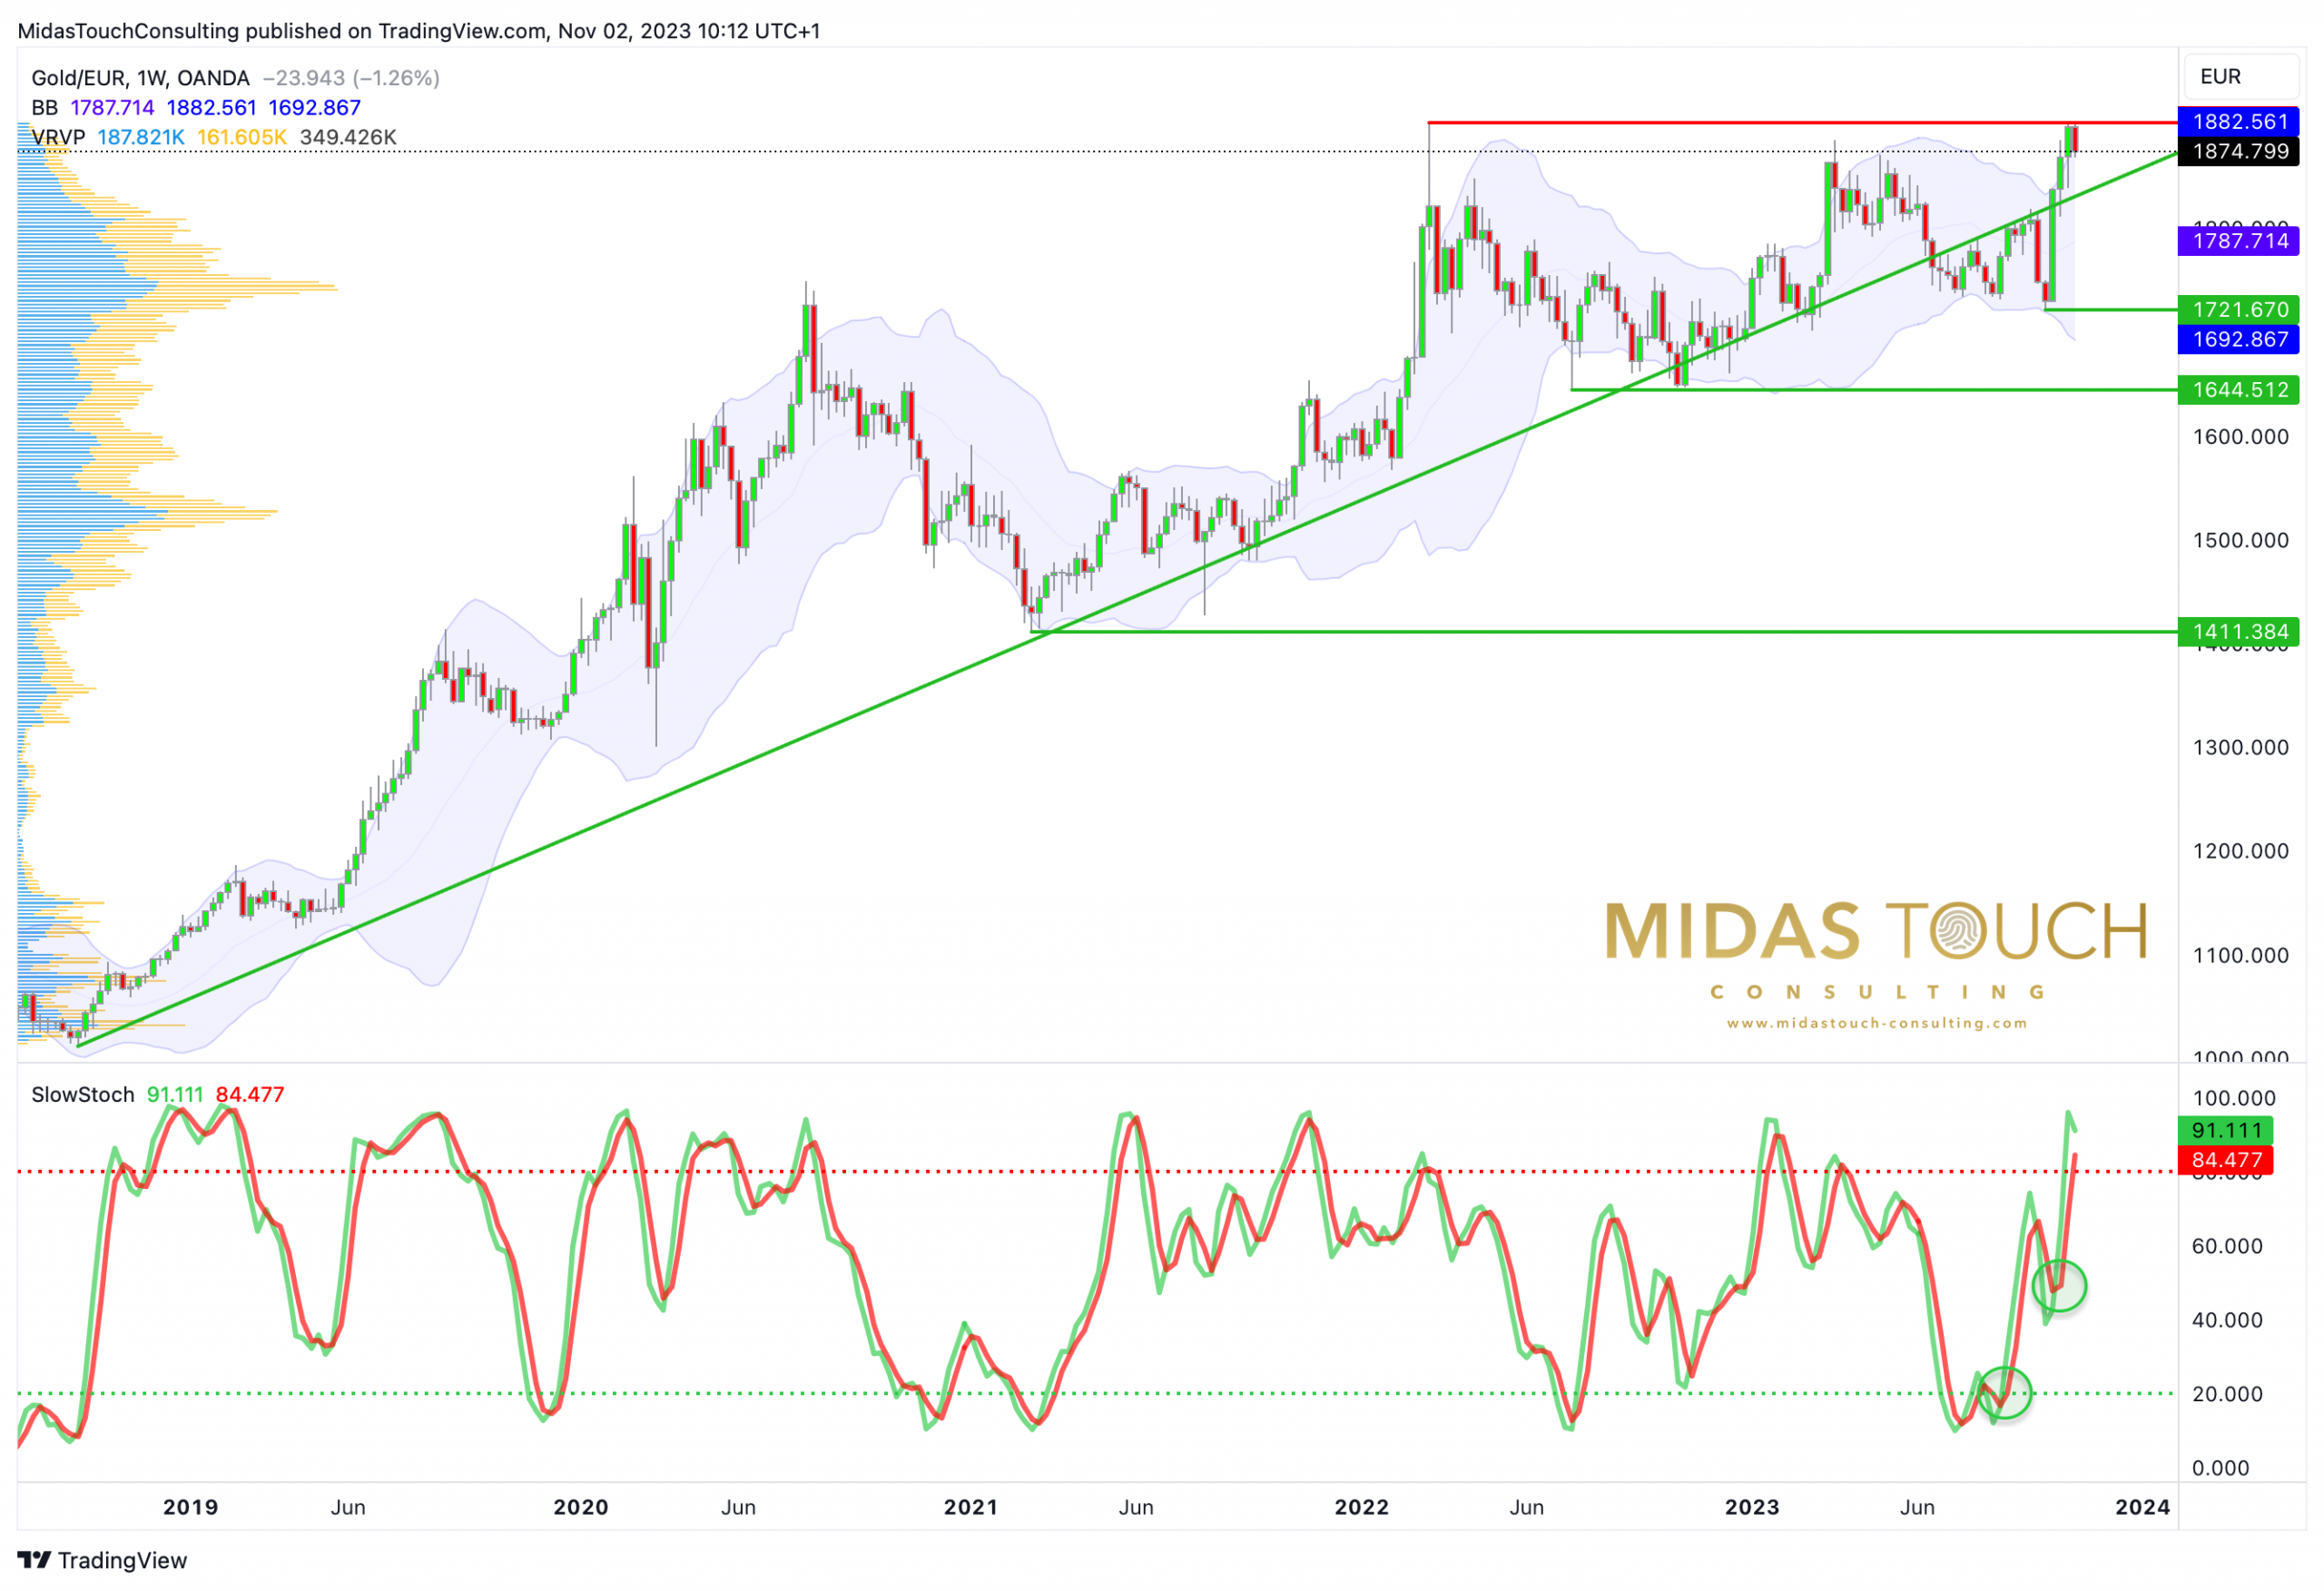 Gold in Euro, weekly chart as of November 2nd, 2023. Source: Midas Touch Consulting. November 2nd, 2023, Gold - Fulminant rally on the way to reach the all-time high.